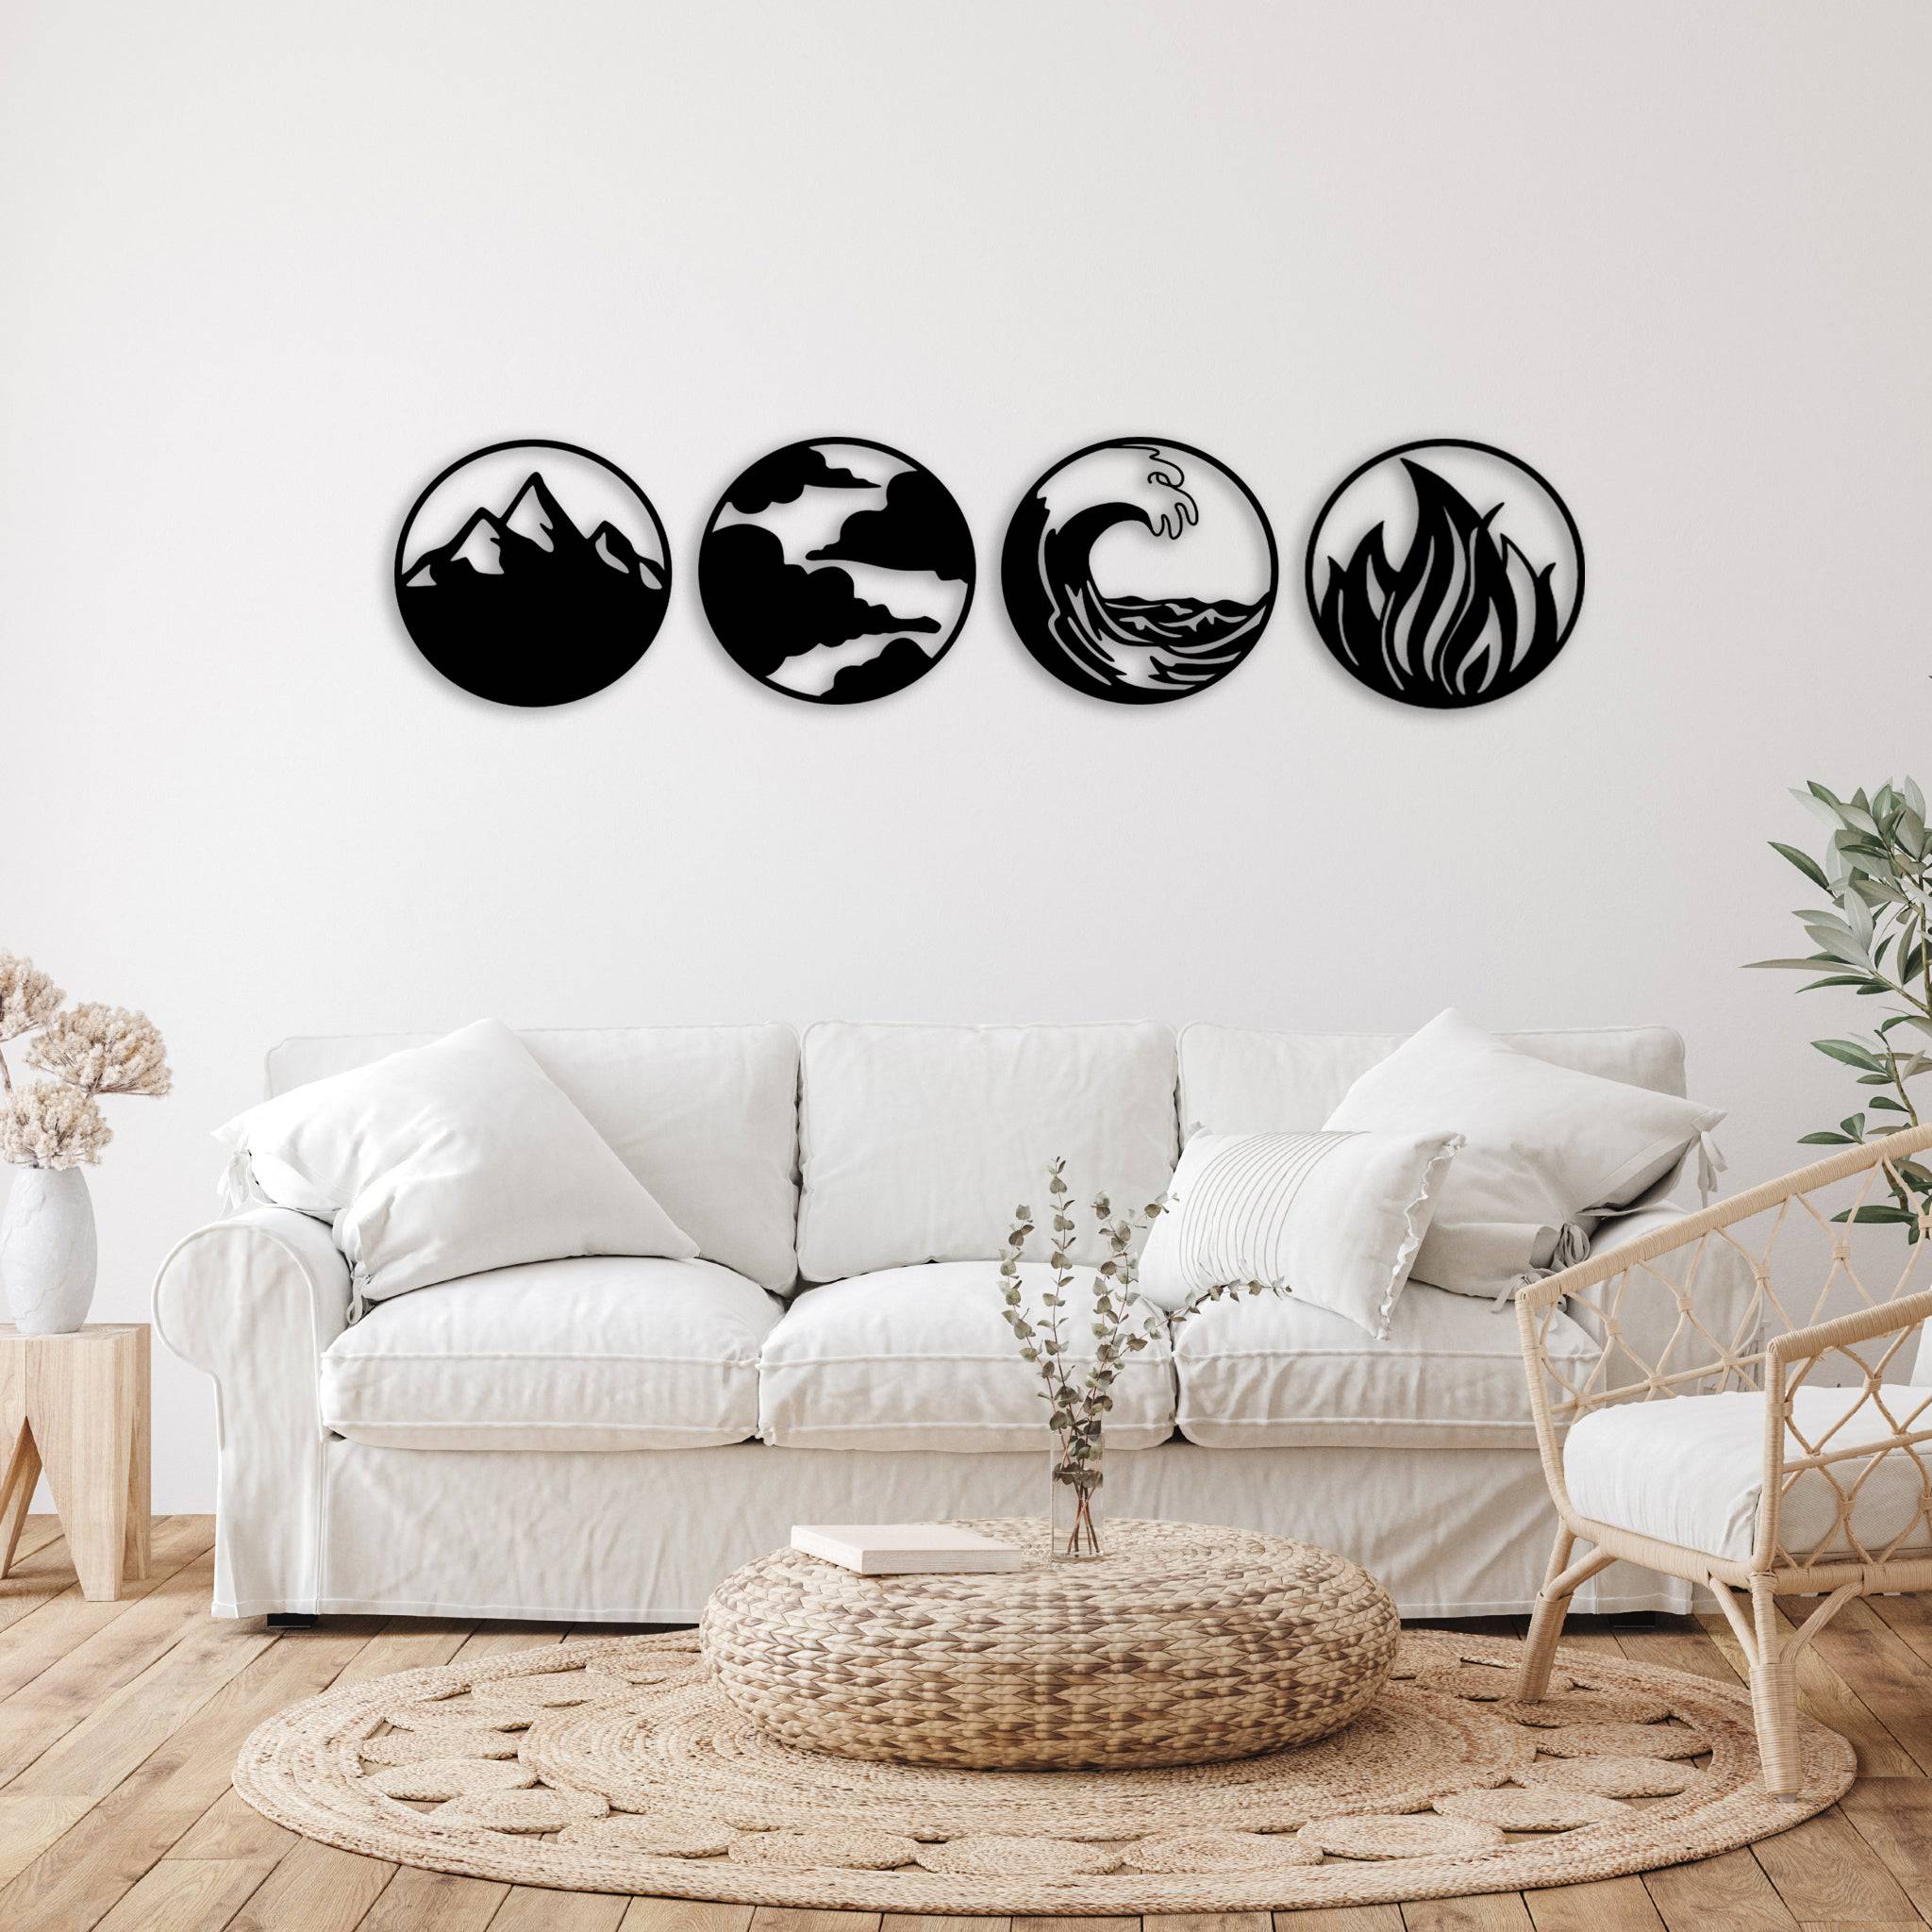 Nature's Four Elements - Metal Wall Art